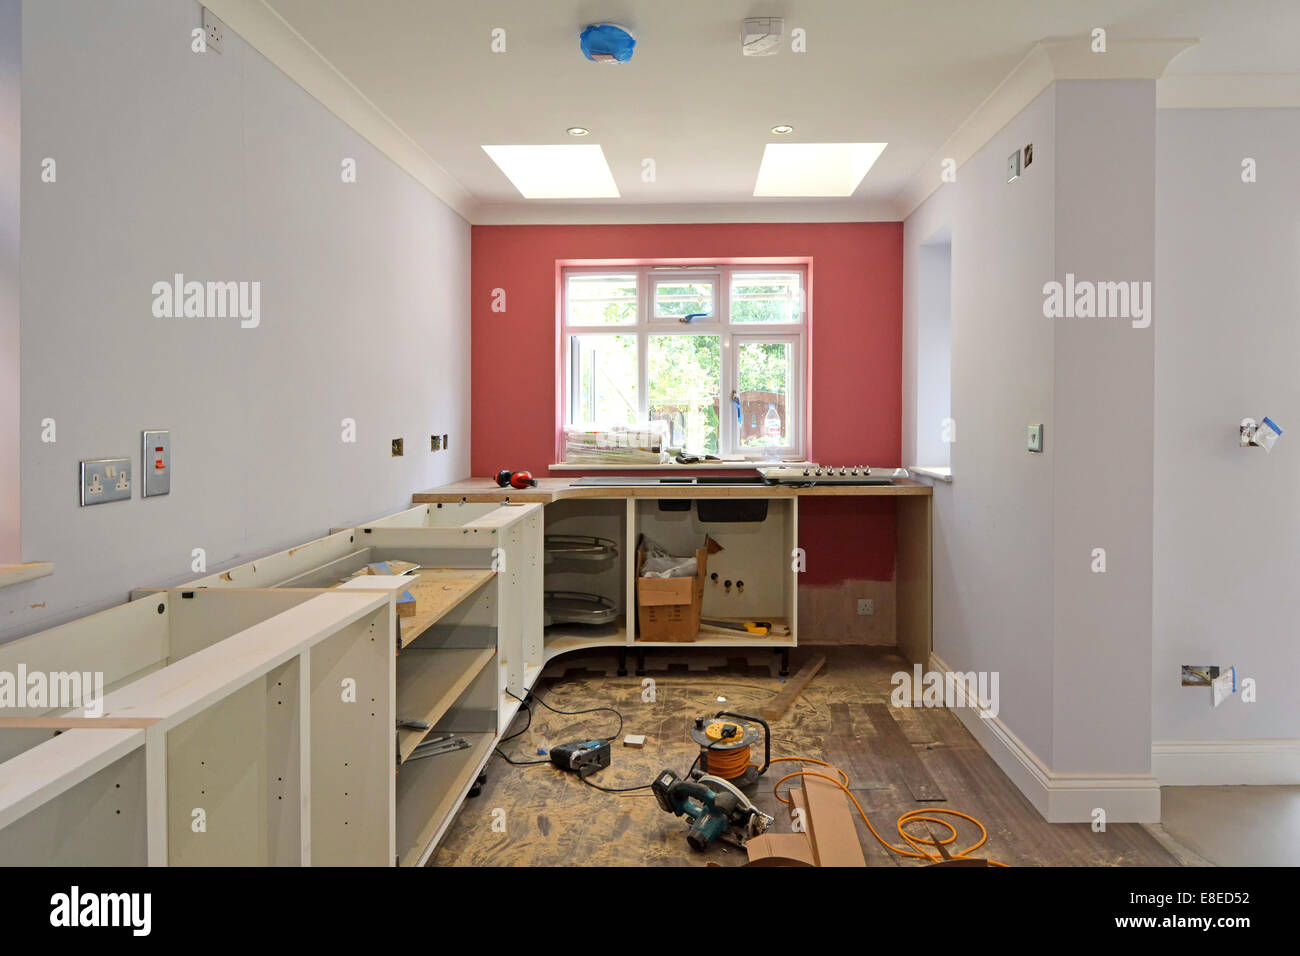 Kitchen fitters tools new cabinets and worktops being installed in new extension to detached house Essex England UK see 'More Info' note below Stock Photo